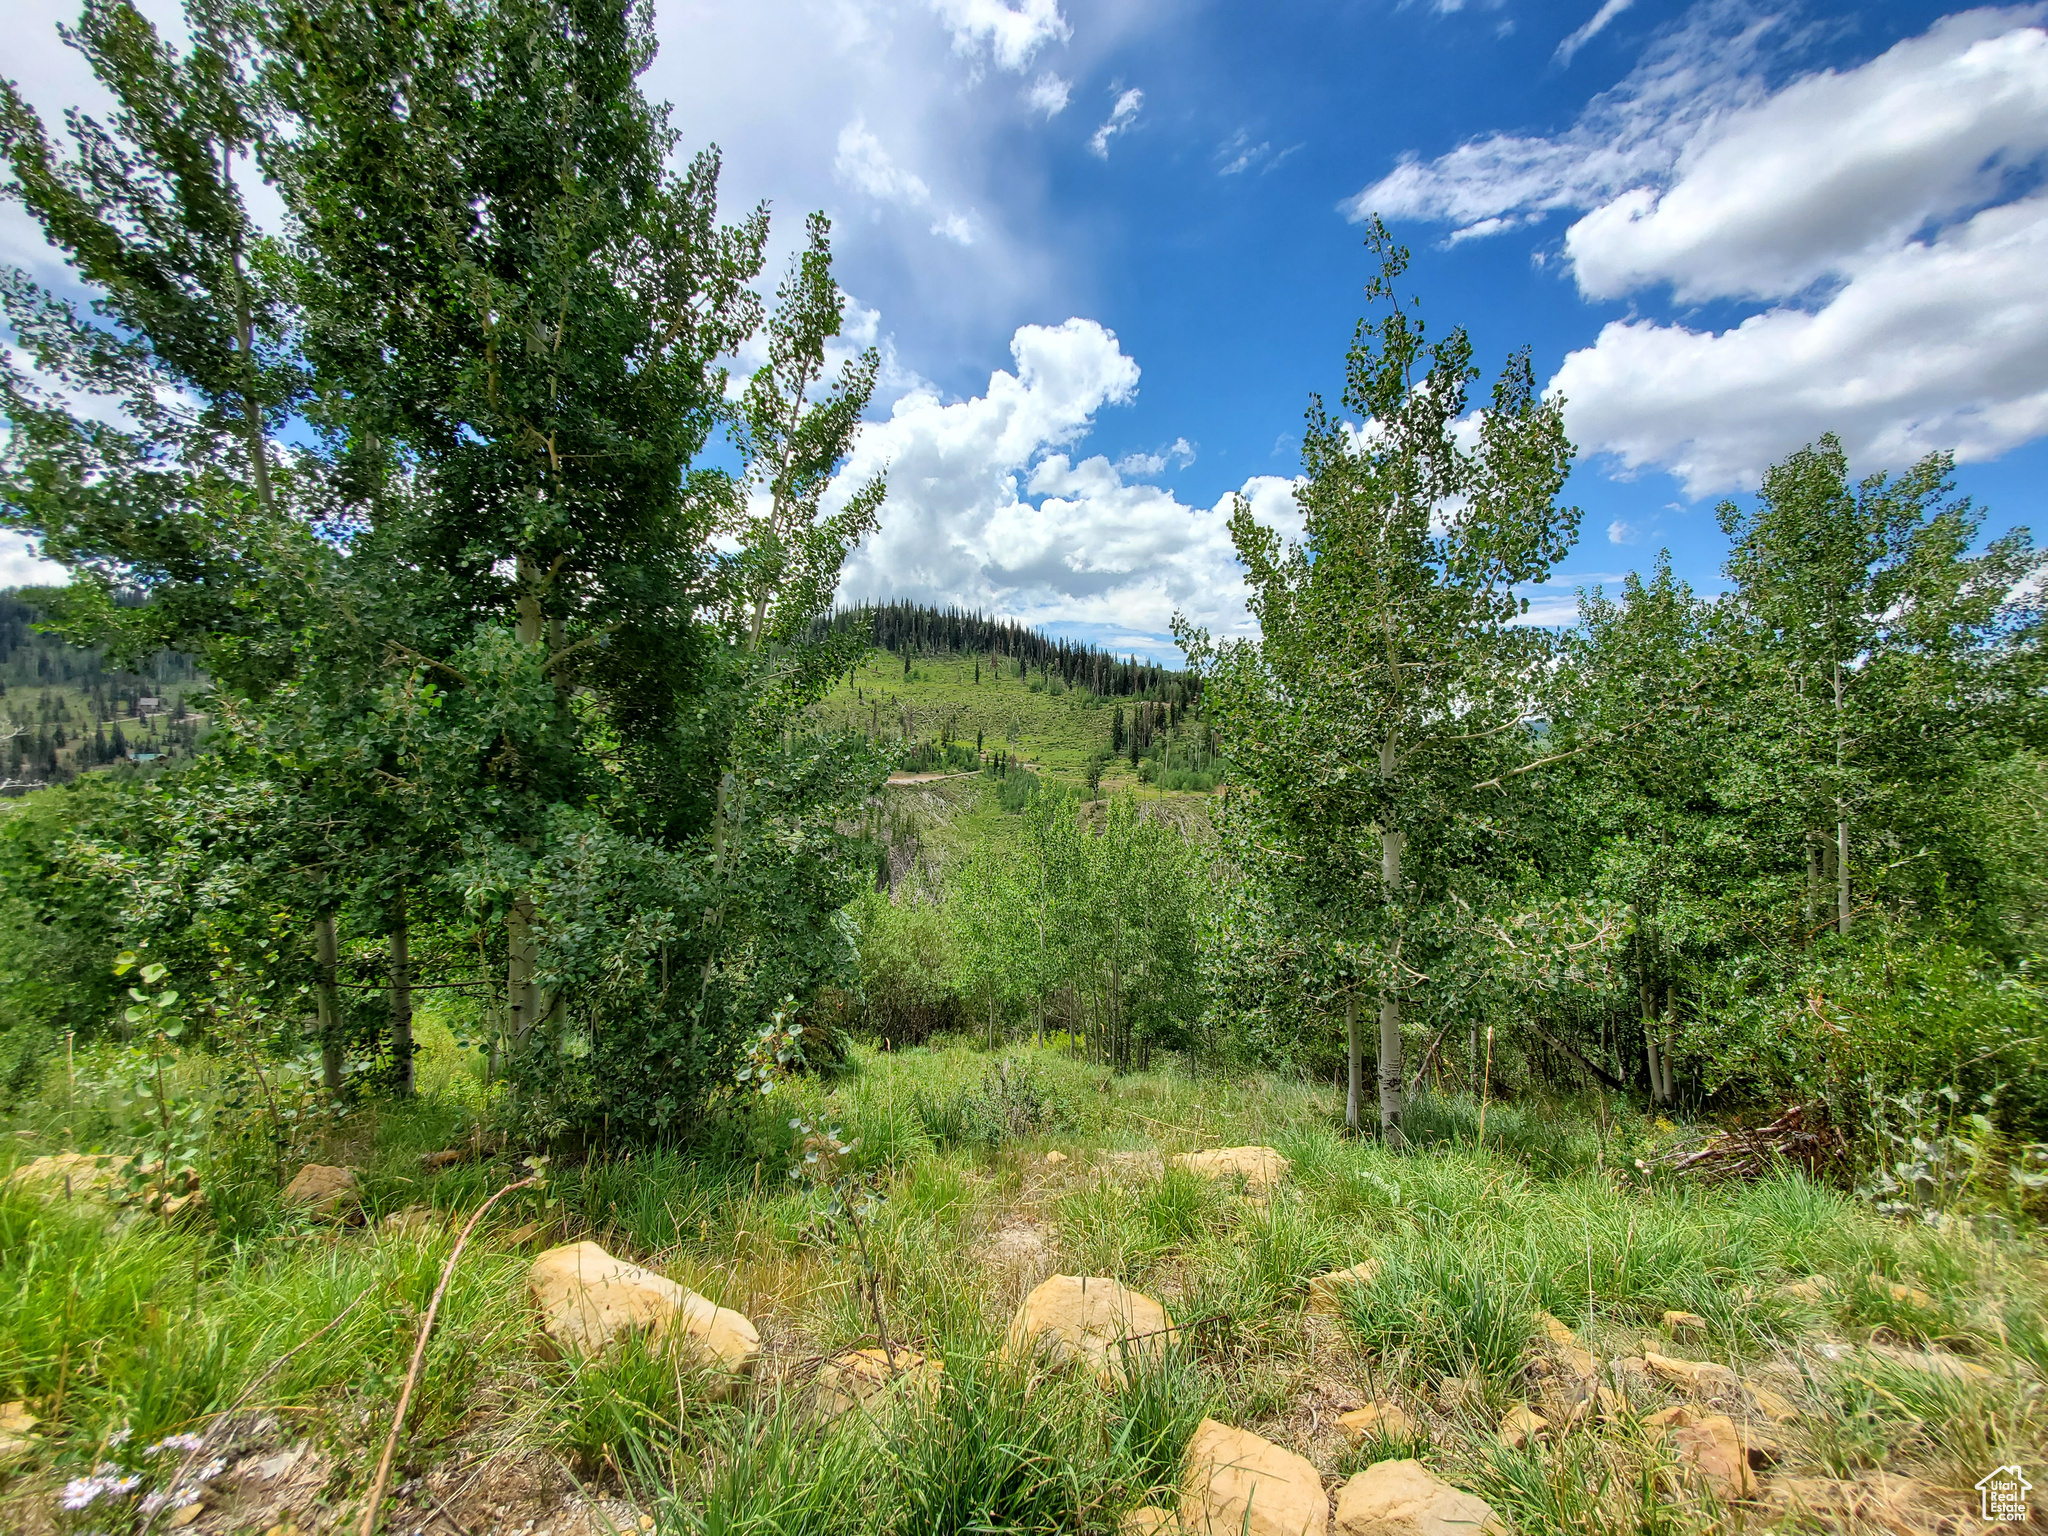 103 BROOKS CANYON #G103, Fairview, Utah 84629, ,Land,For sale,BROOKS CANYON,1988255